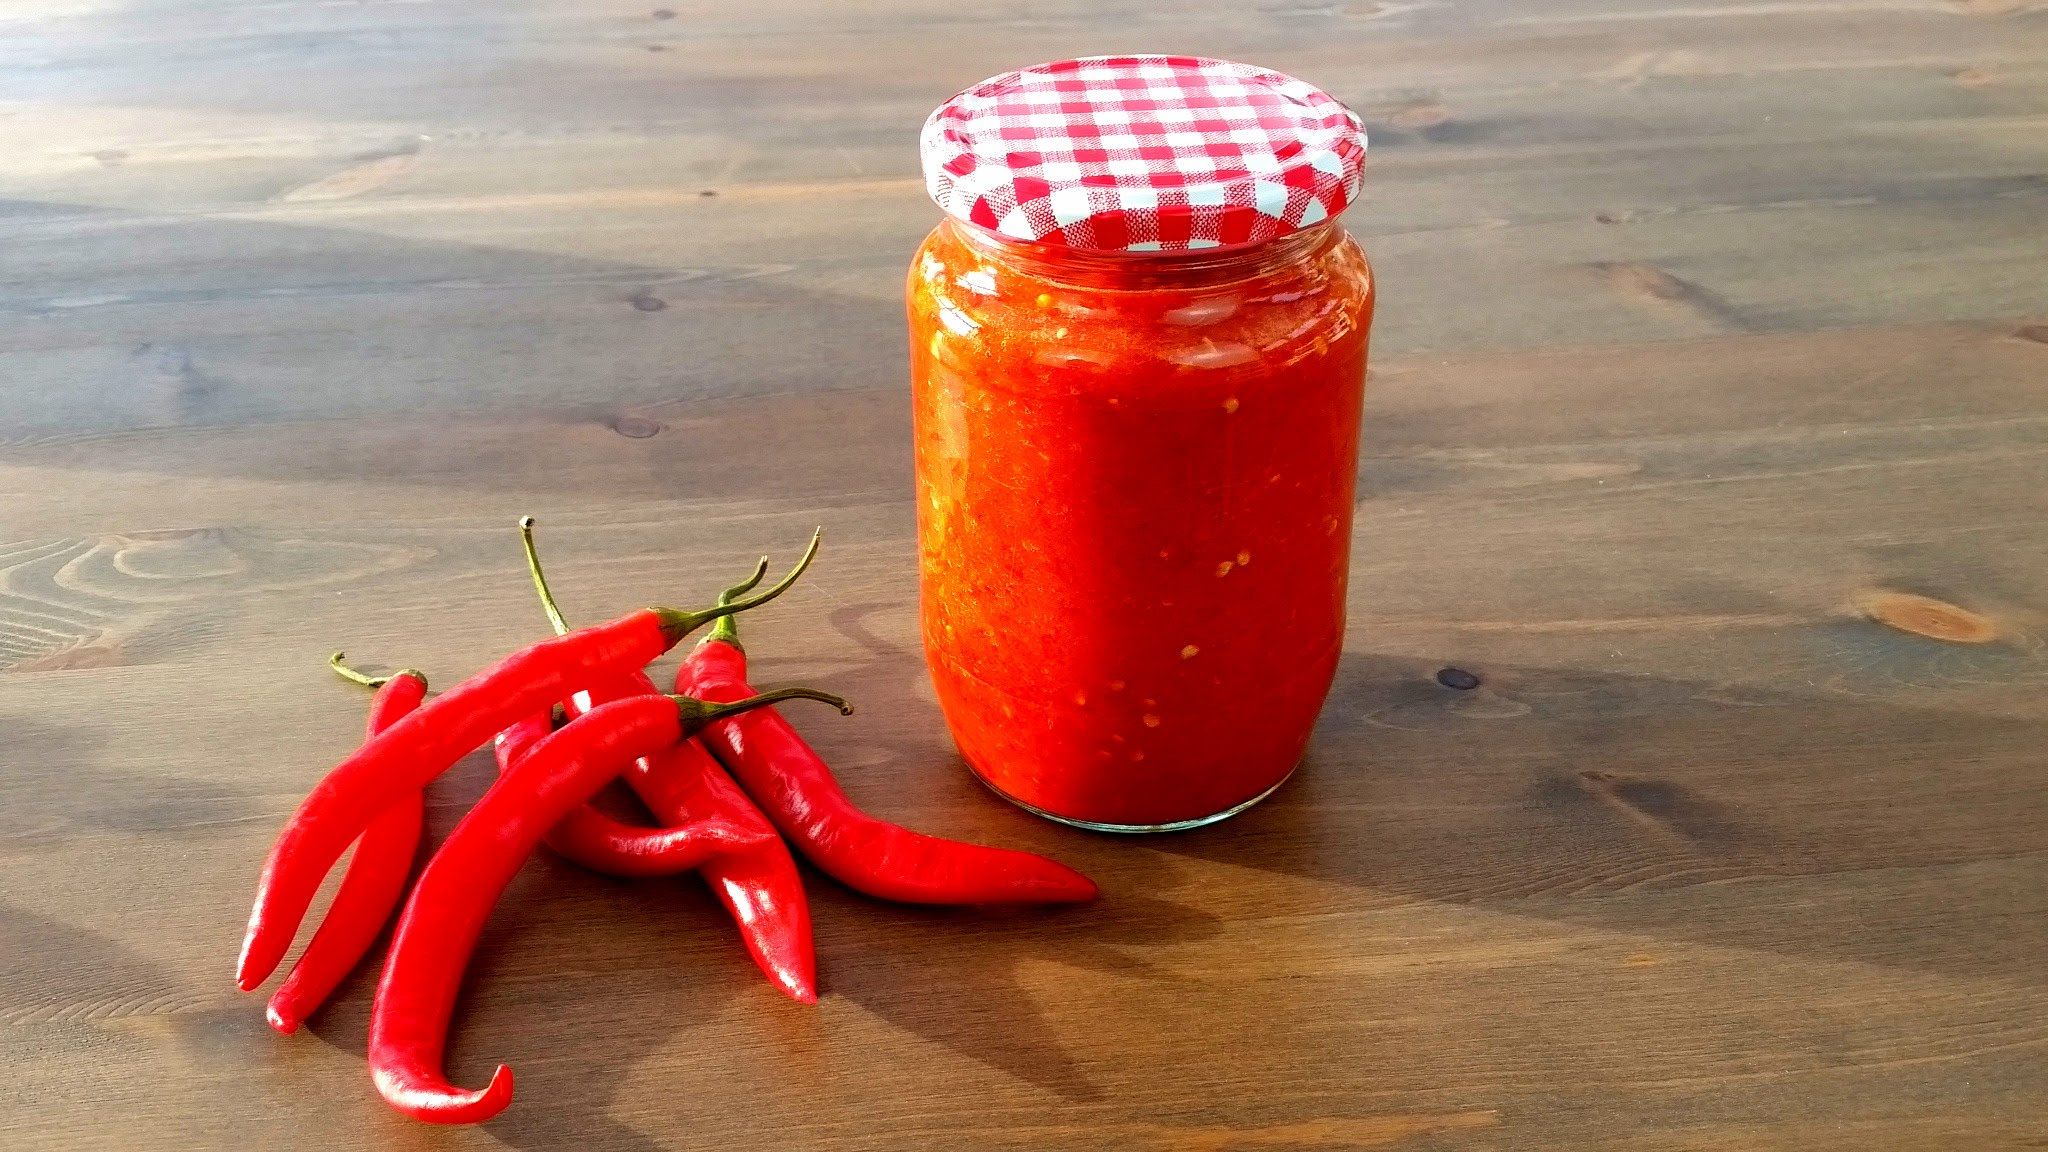 Hd Wallpaper Of A Jar Of Spicy Red Chili Sauce Sauce With